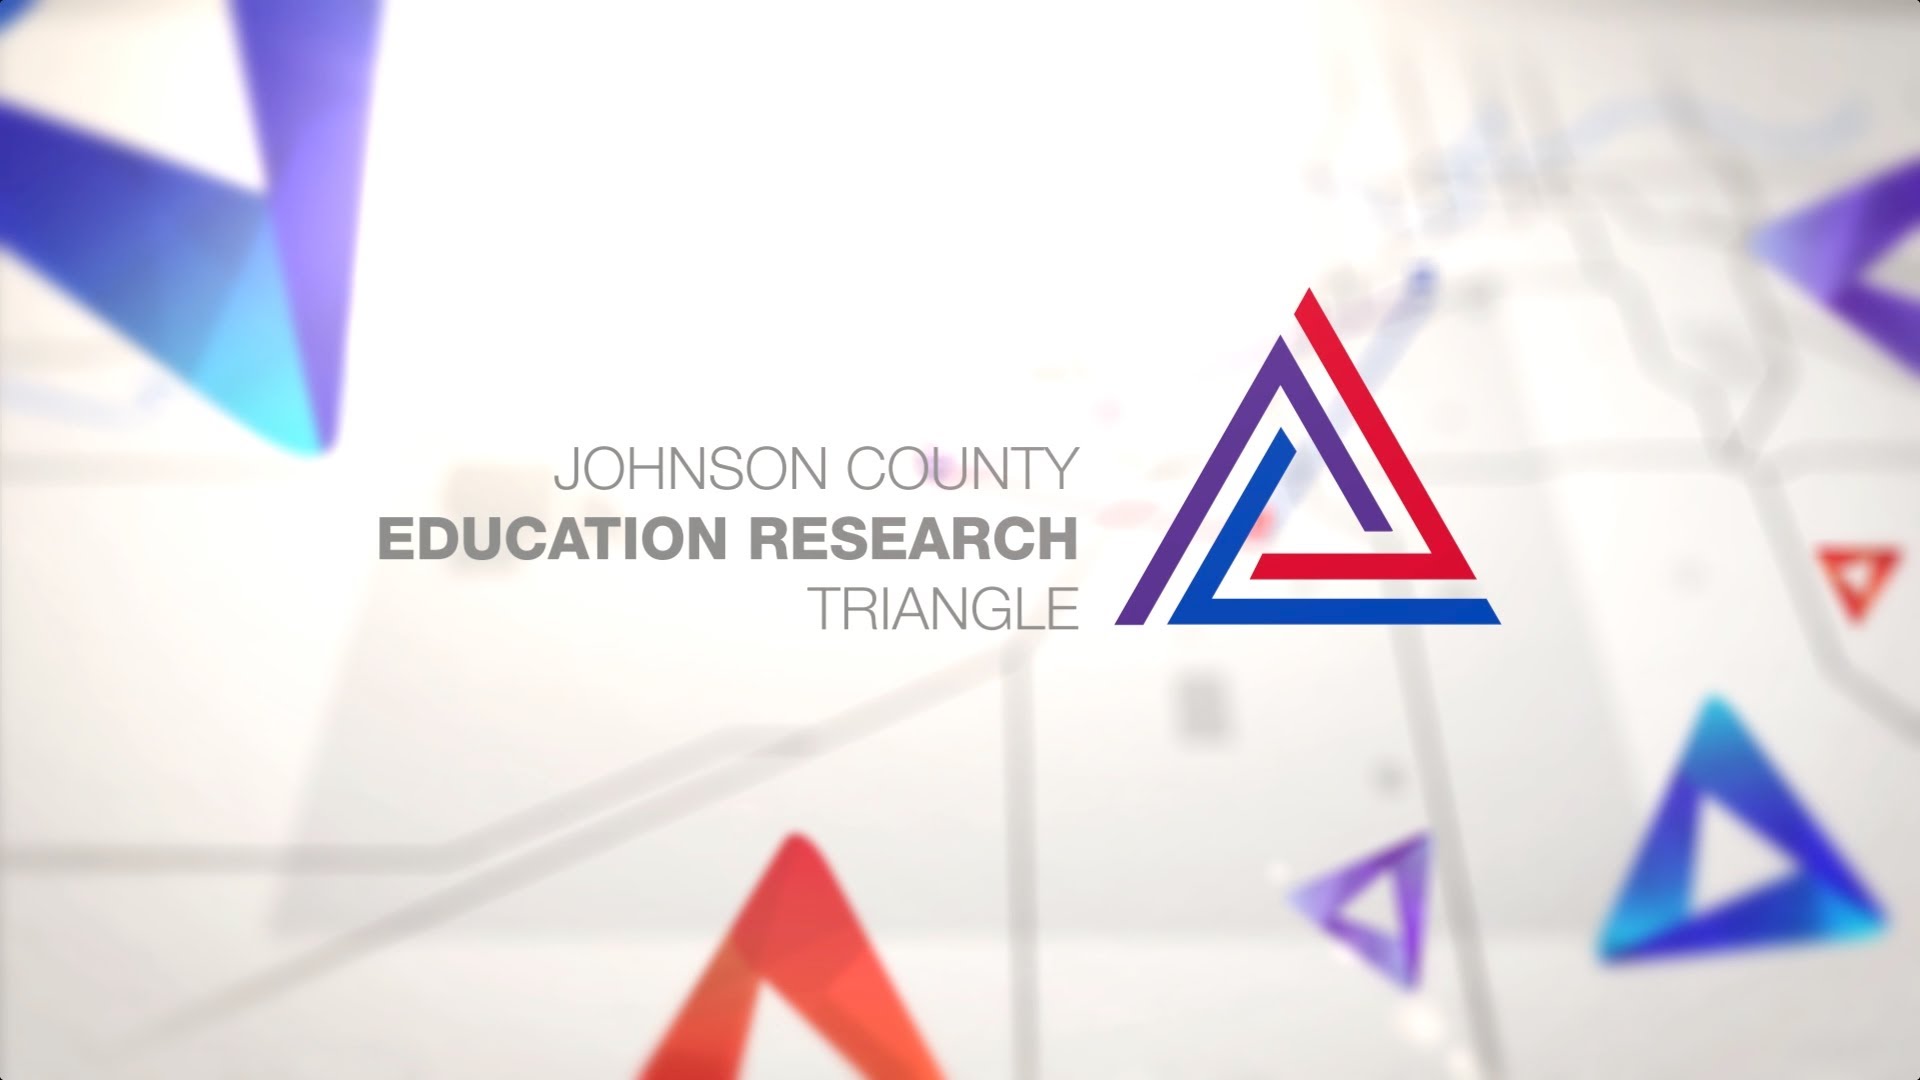 Johnson County Education Research Triangle